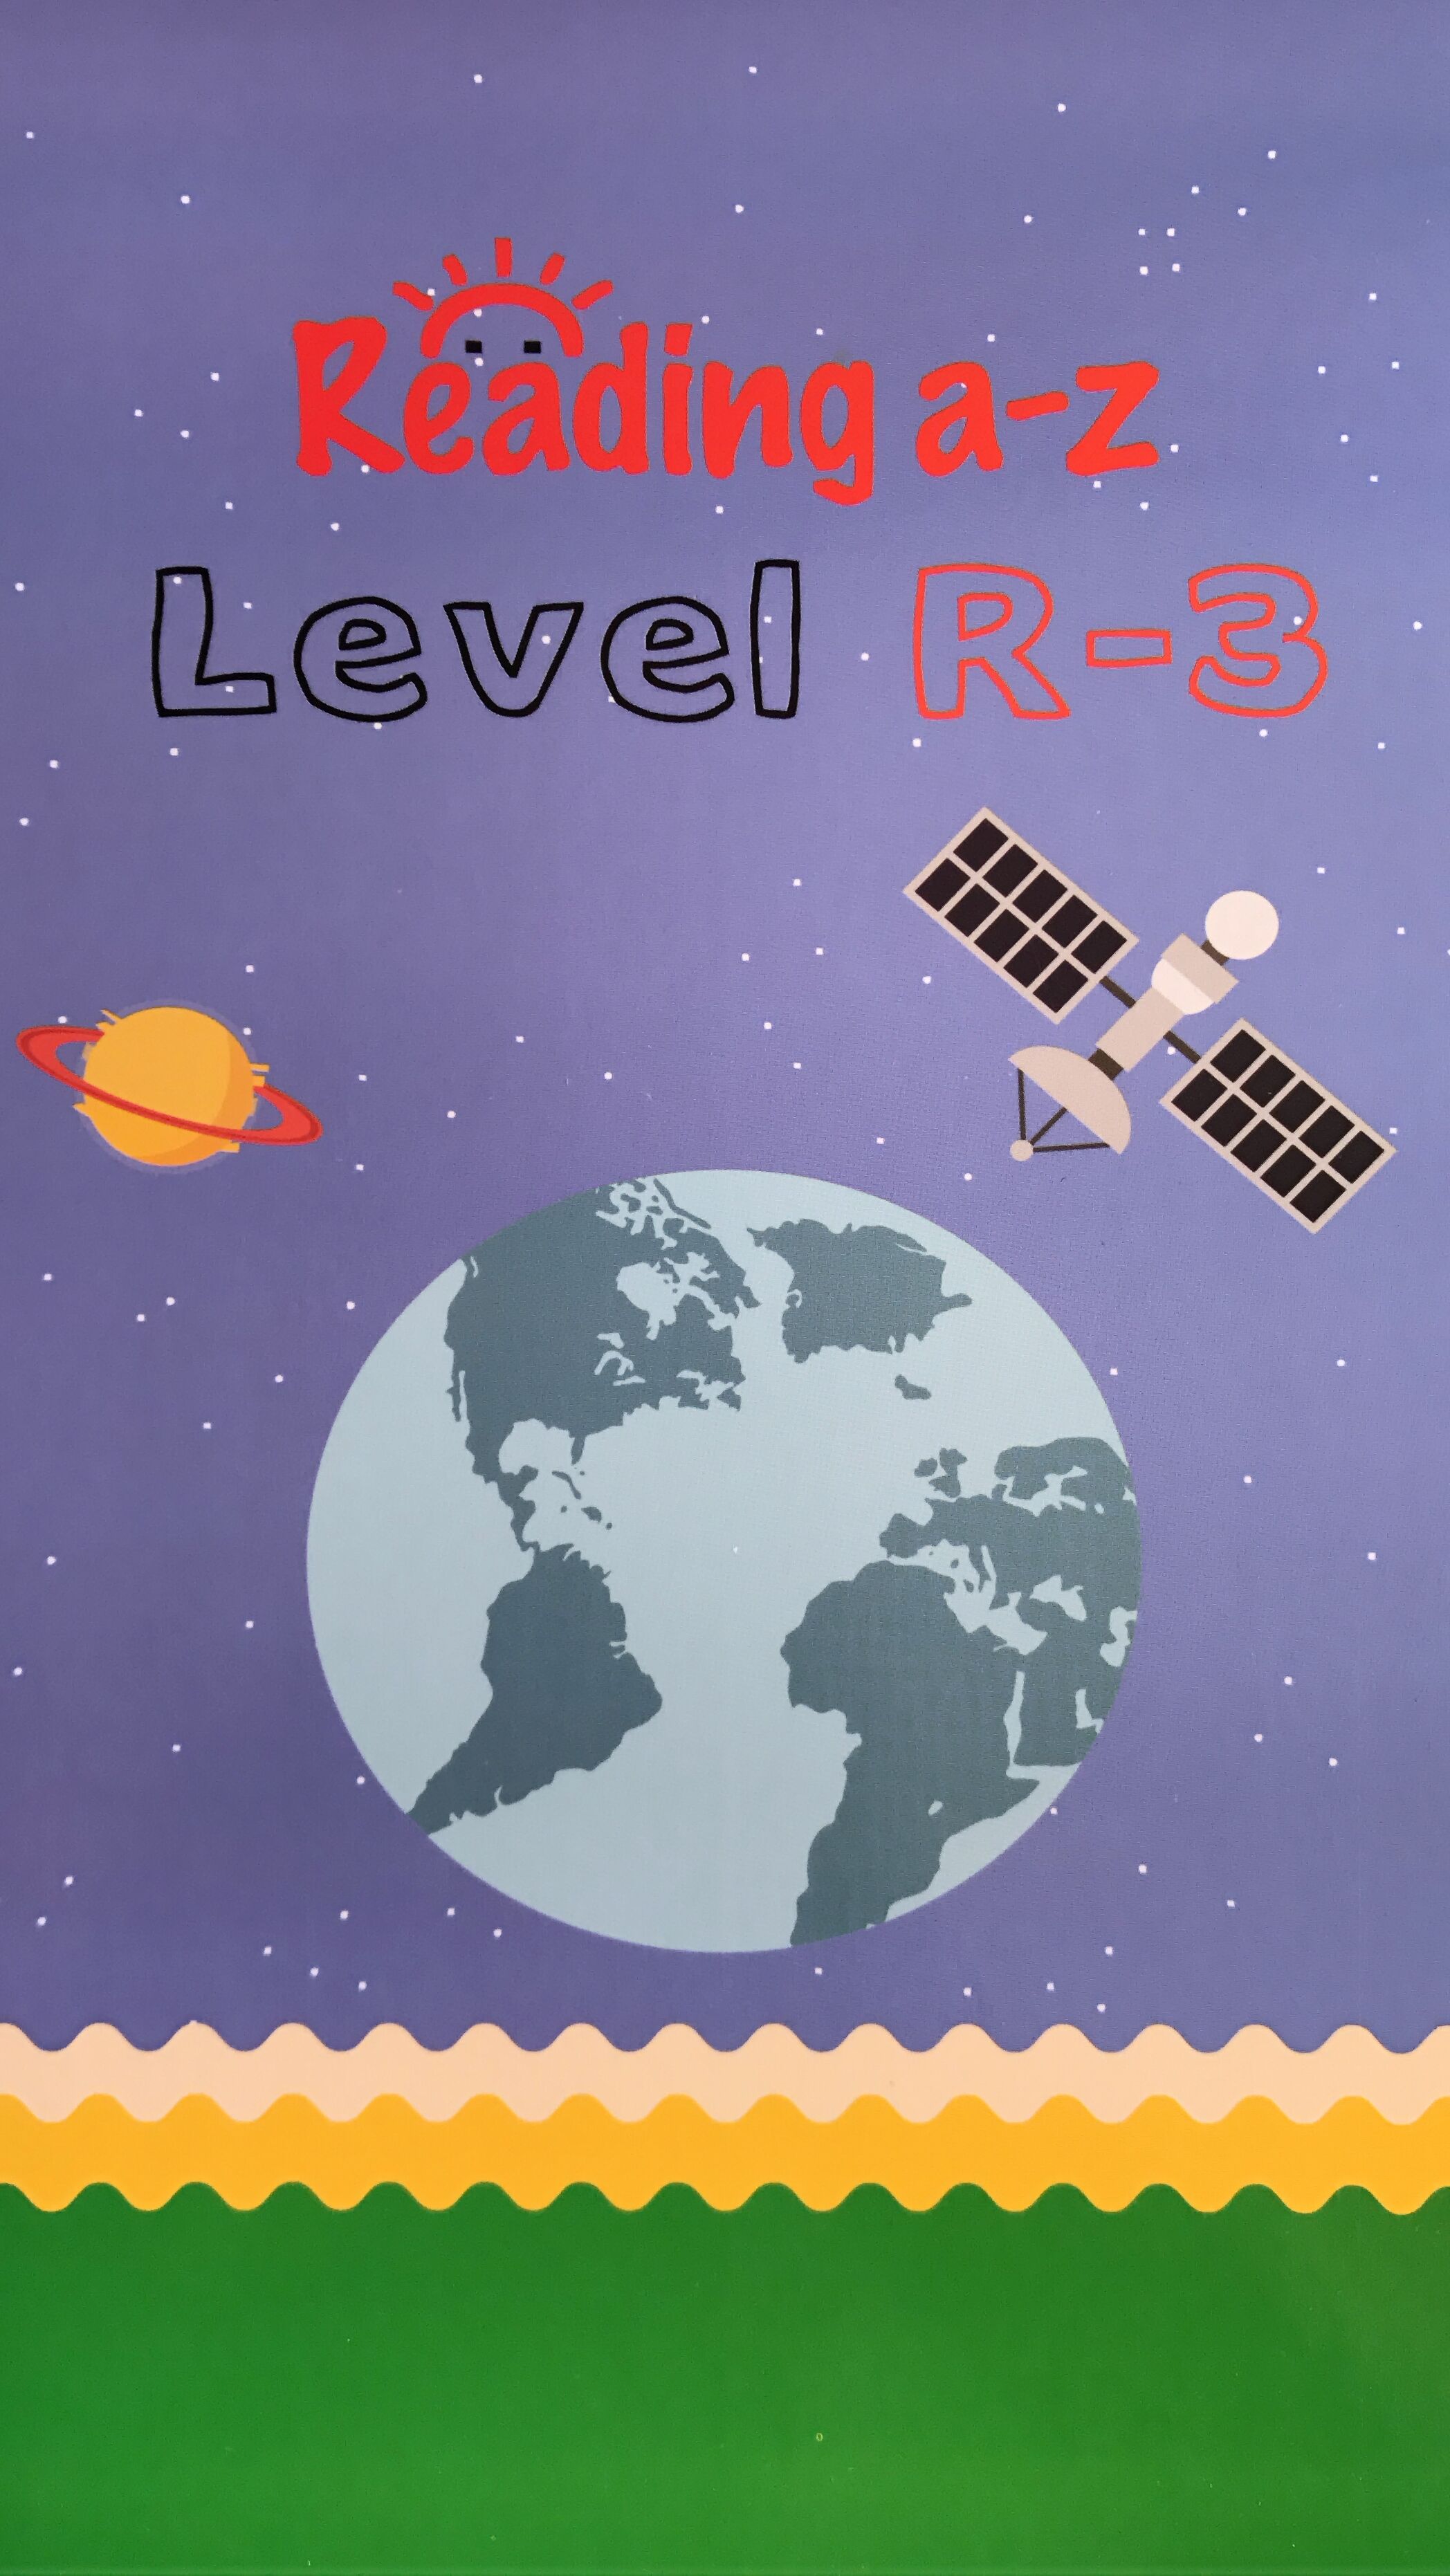 Reading A-Z Level R-3